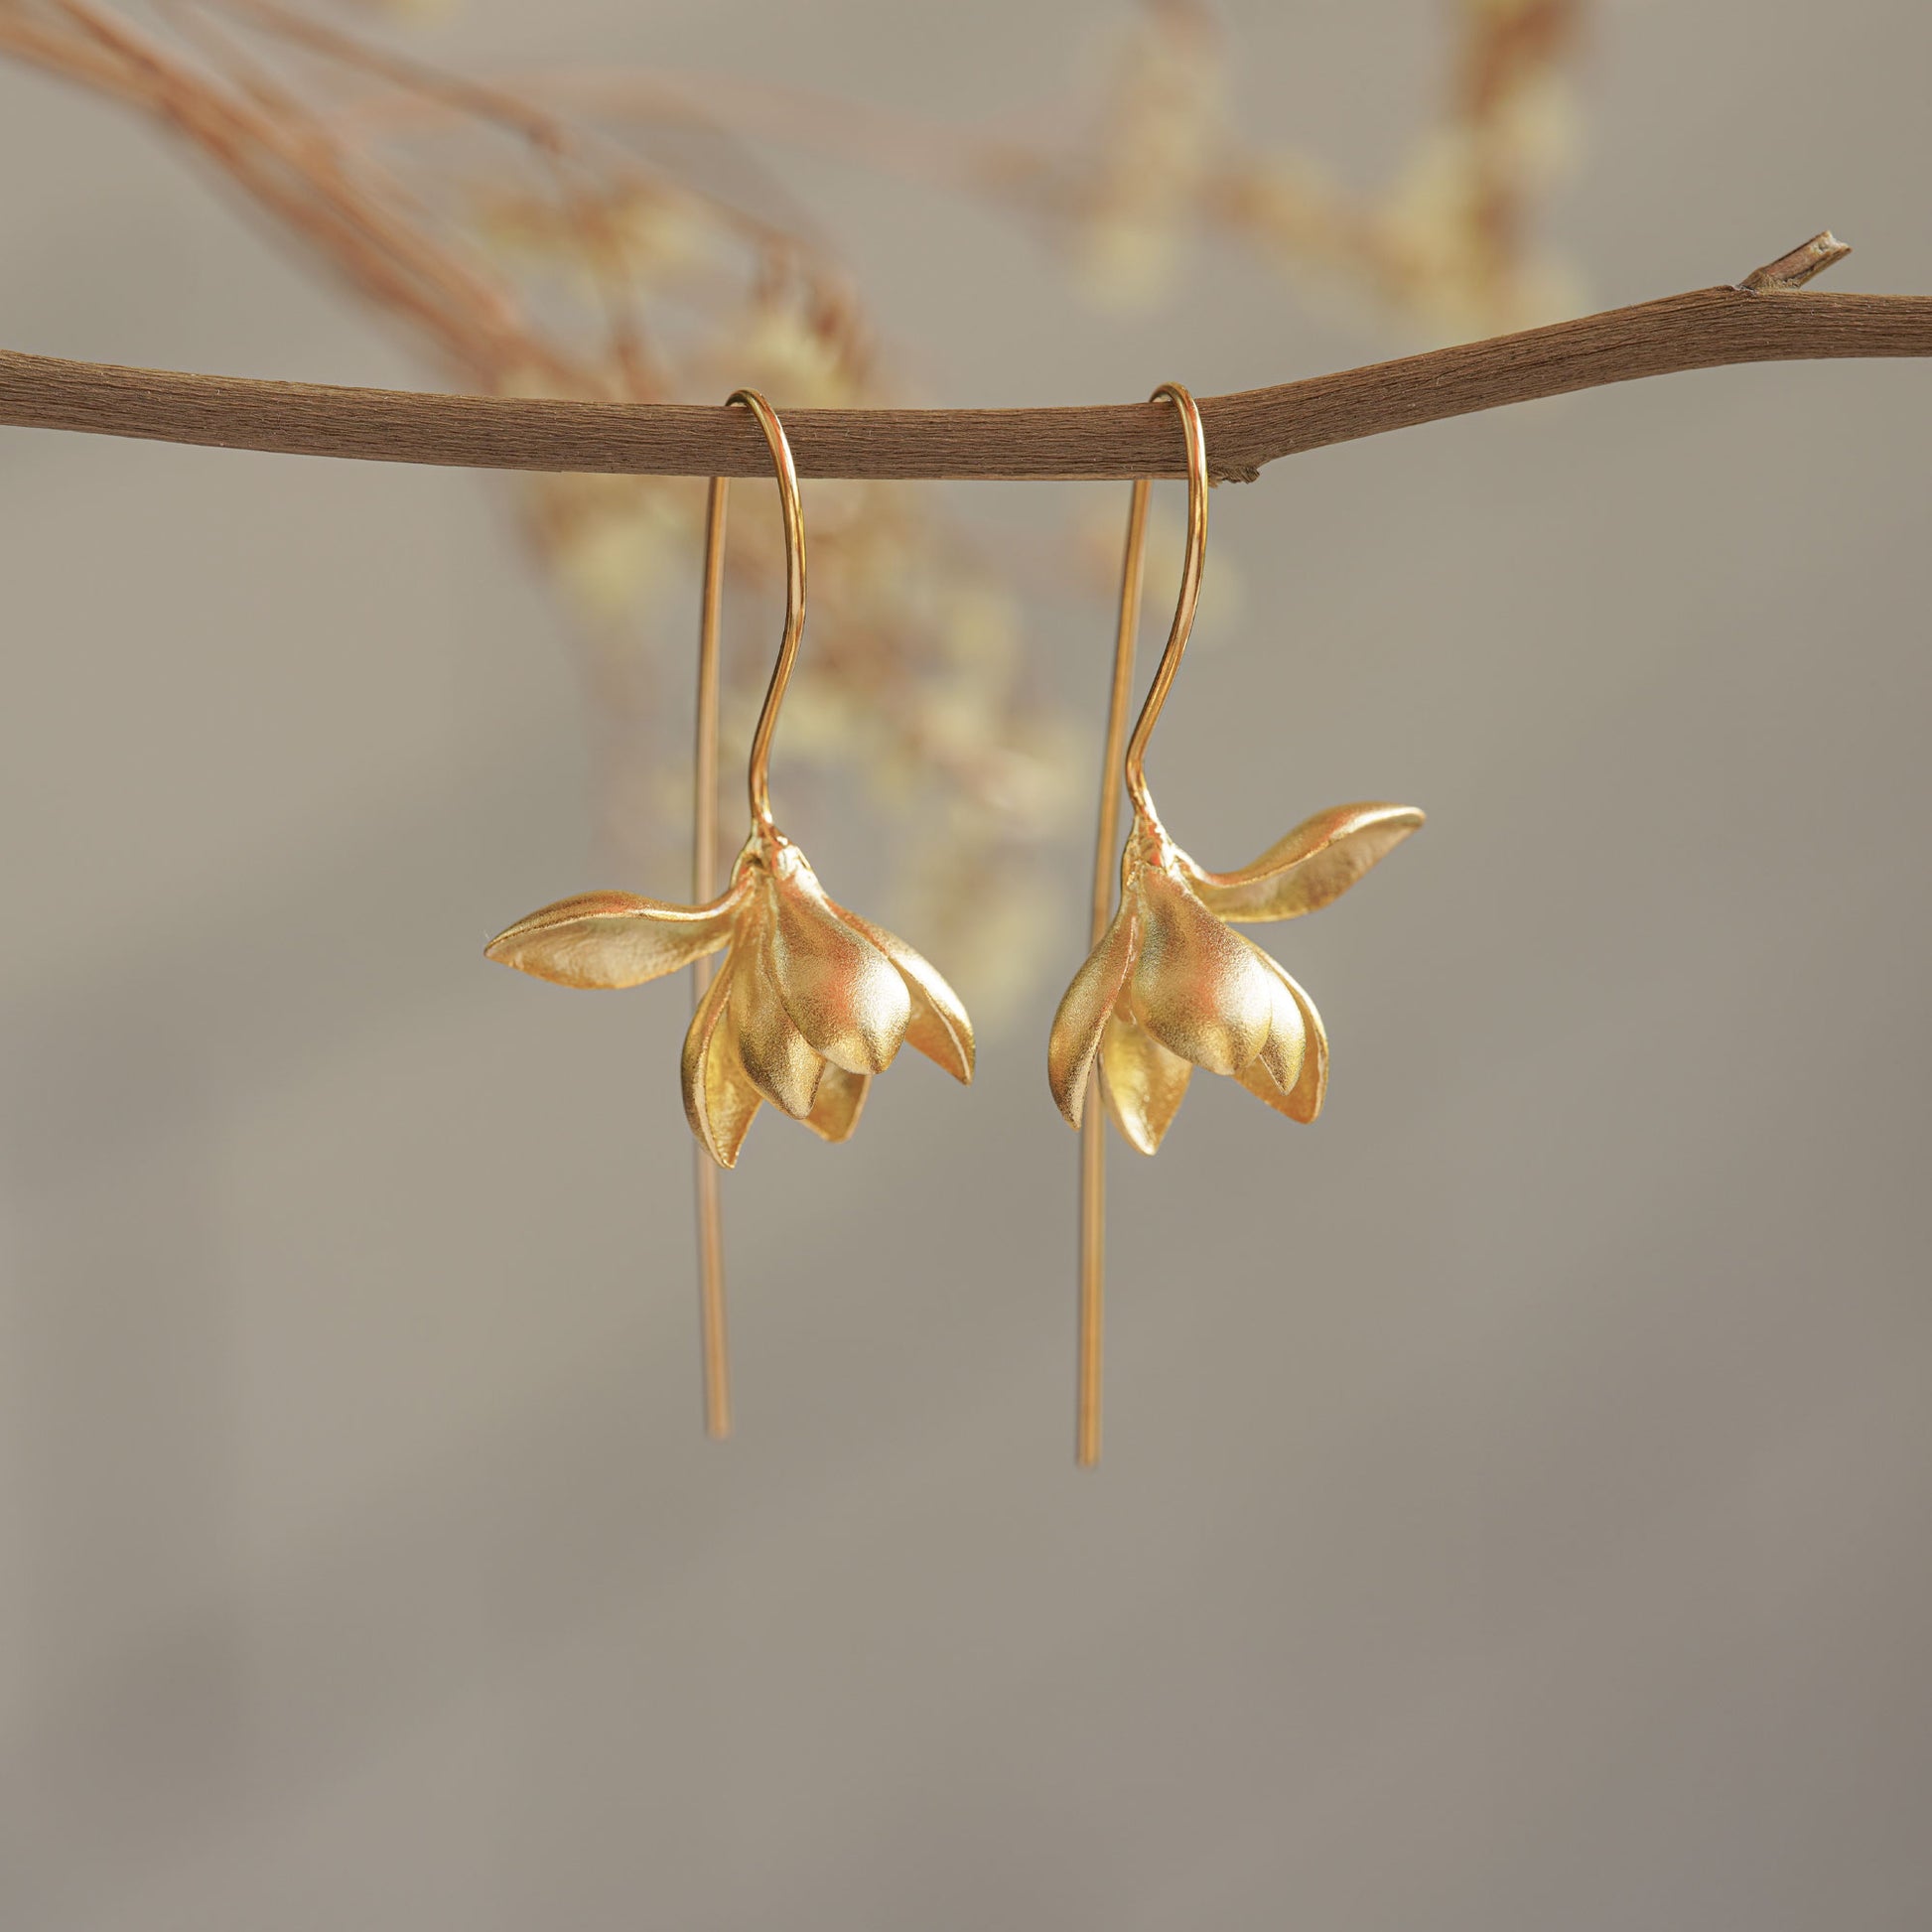 Golden magnolia earrings hanging from a tree branch